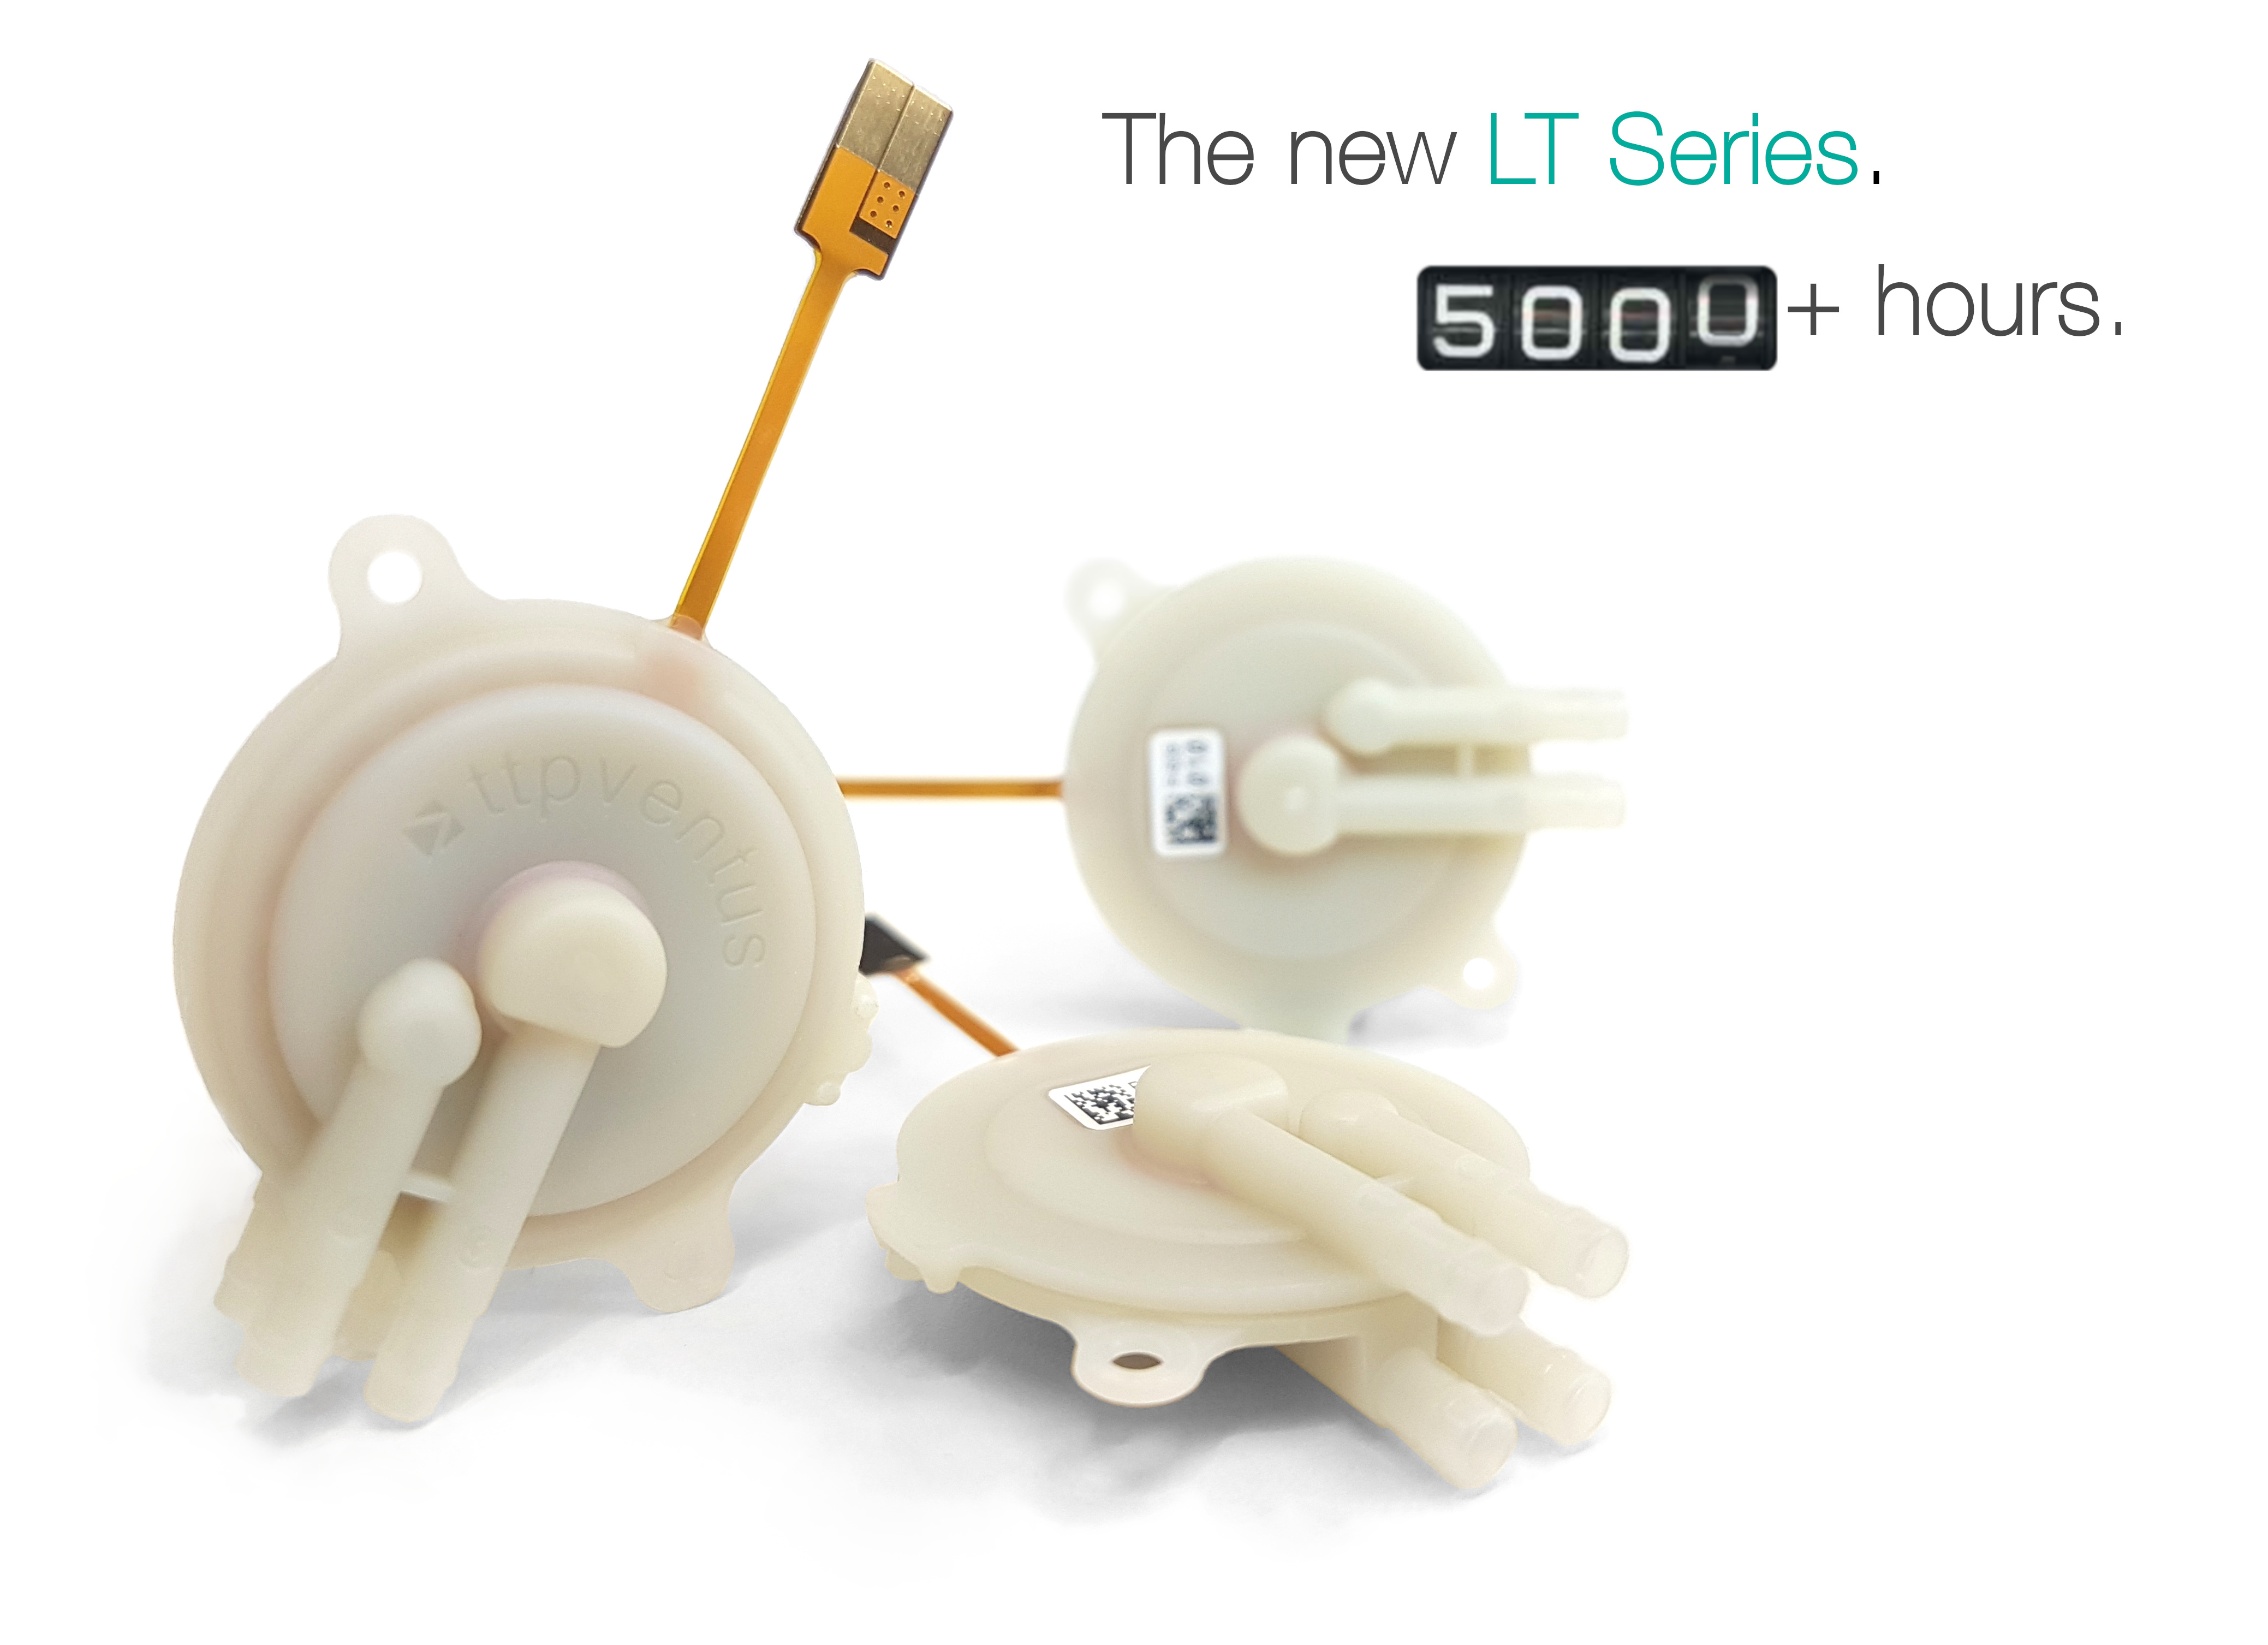 The new LT Series has been developed for applications across the medical, life science, environmental and industrial sectors.